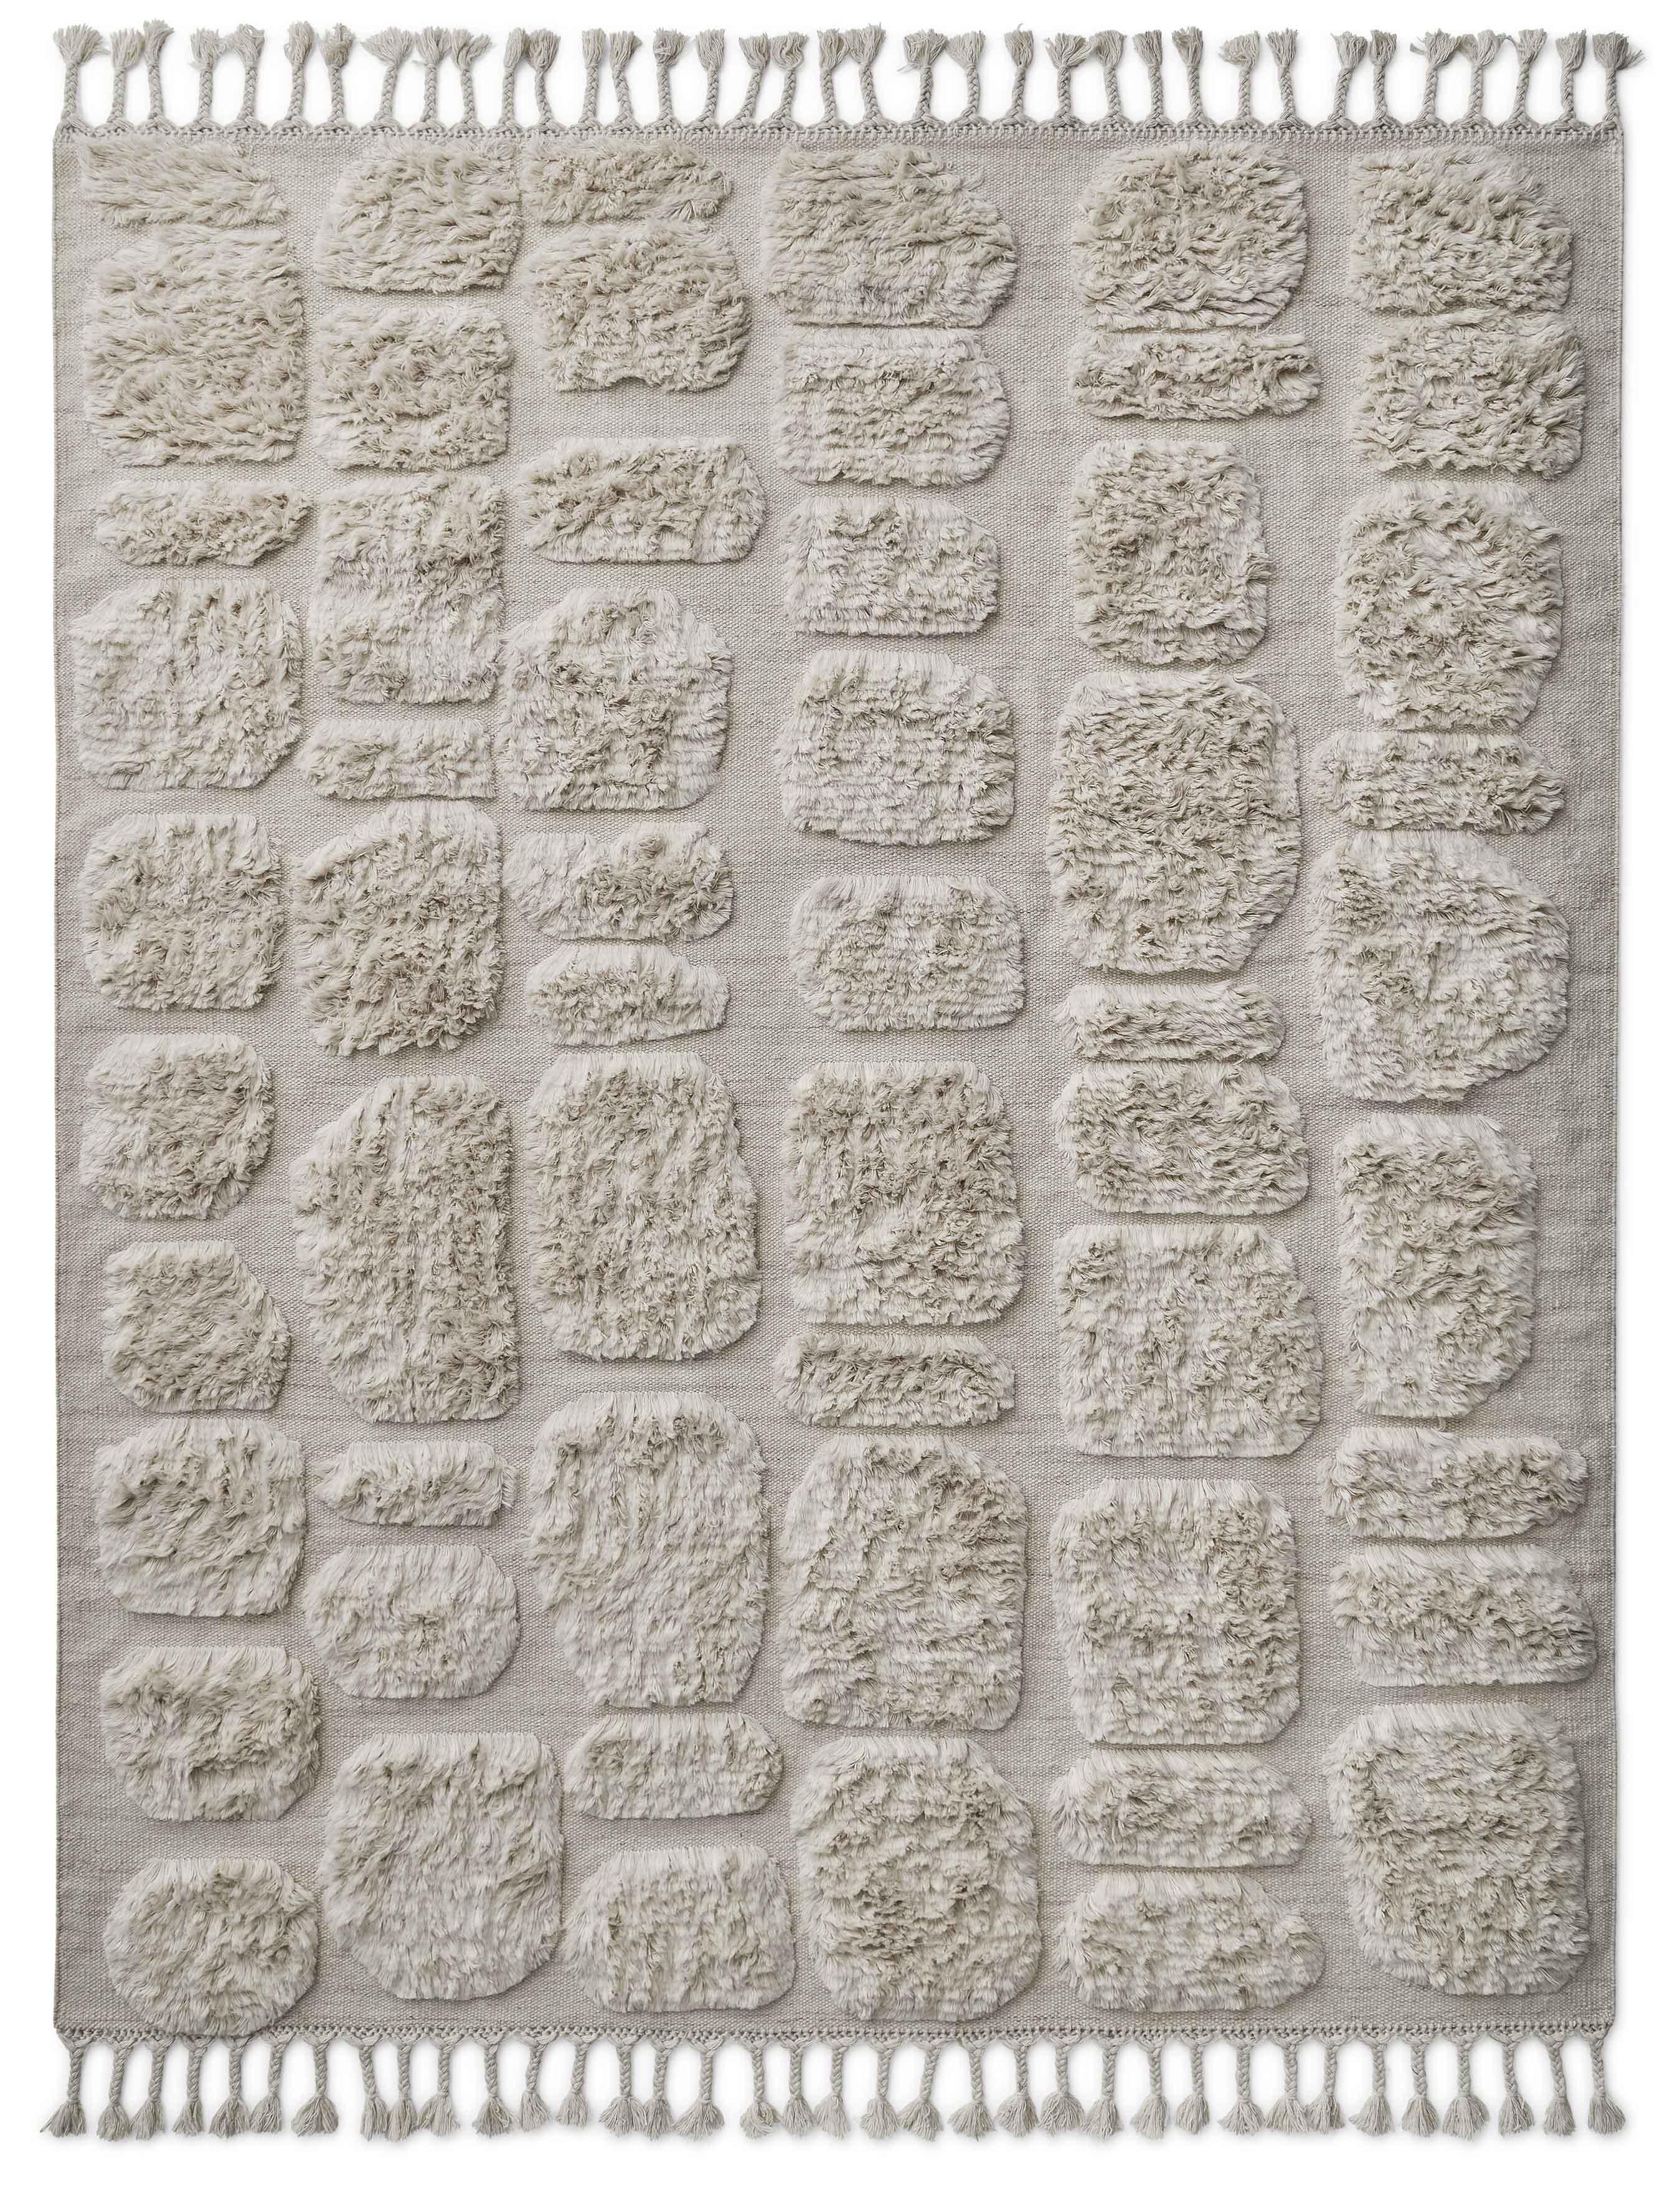 No.05 Rug by Cappelen Dimyr
Dimensions: D290 x H350
Materials: 85% wool 15% cotton

no.05 is a contemporary yet timeless hand-knotted rug in natural wool. The soft fields of shaggy wool pattern create an organic and bohemian vibe to this